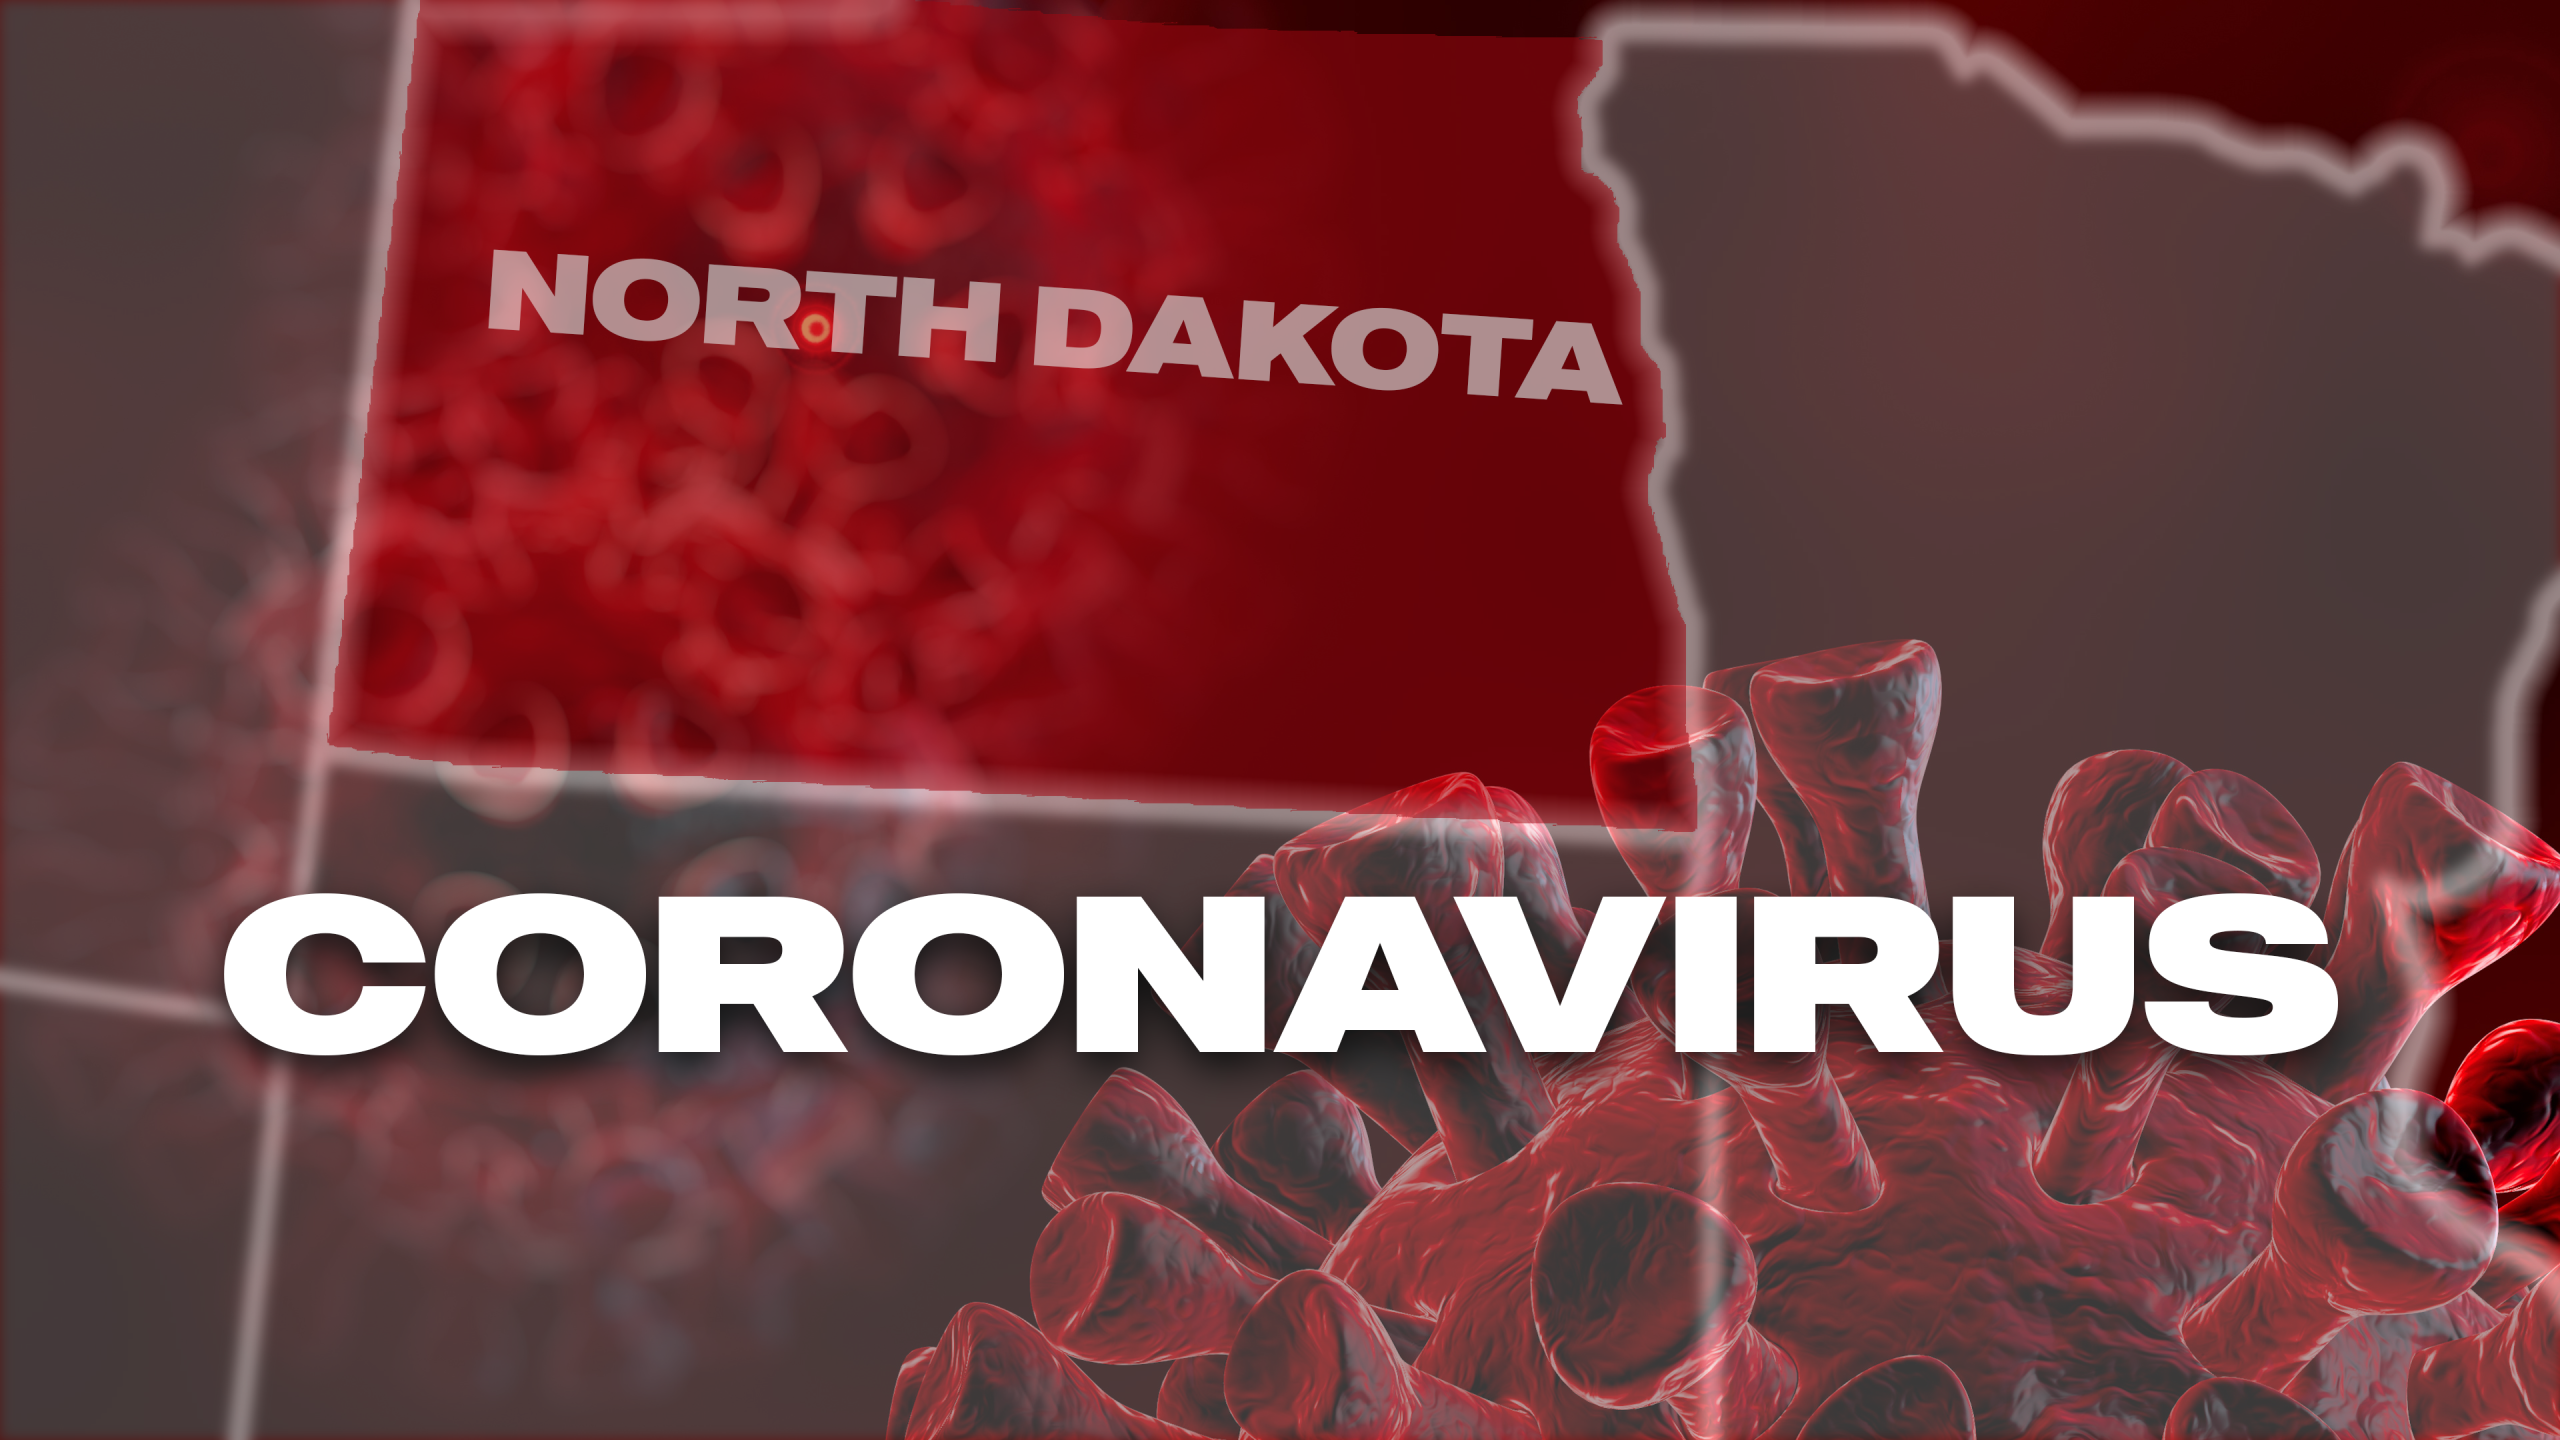 COVID-19 State of Emergency is lifted in North Dakota